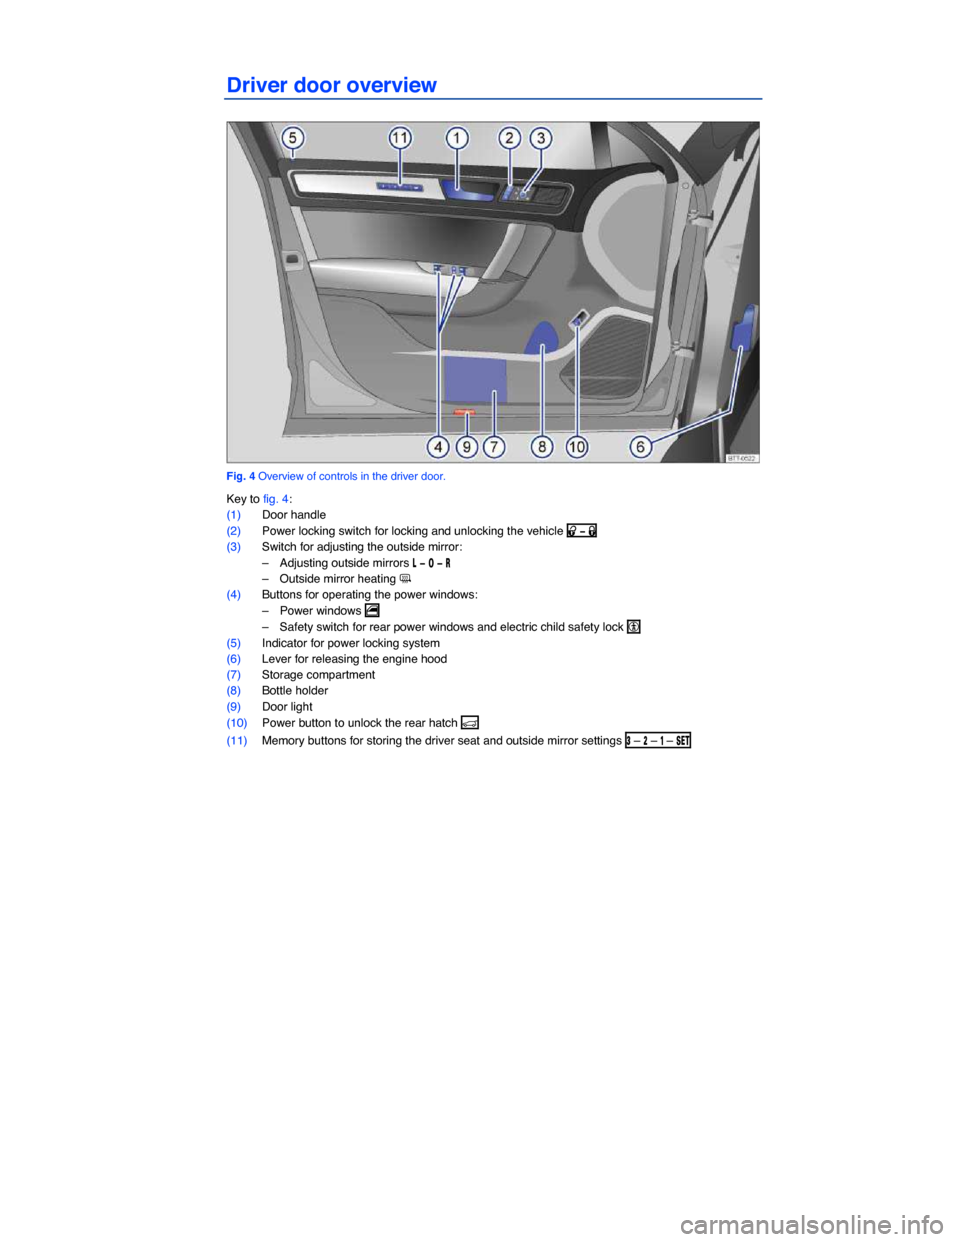 VOLKSWAGEN TOUAREG 2014 2.G Owners Manual  
Driver door overview 
 
Fig. 4 Overview of controls in the driver door. 
Key to fig. 4: 
(1) Door handle  
(2) Power locking switch for locking and unlocking the vehicle �0 �